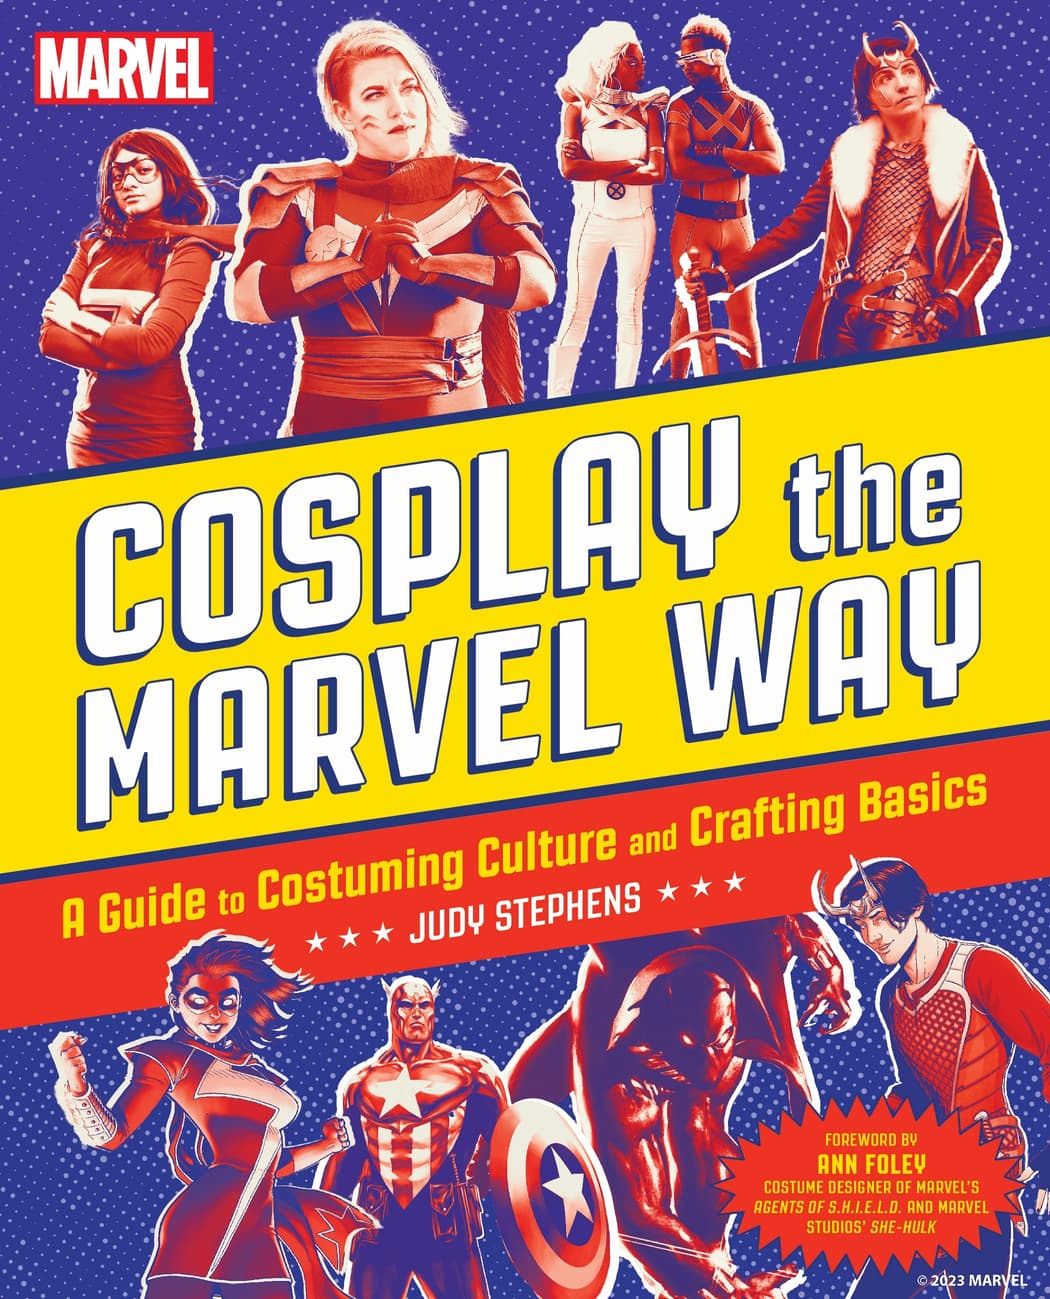 Cover to Cosplay the Marvel Way: A Guide to Costuming Culture and Crafting Basics.